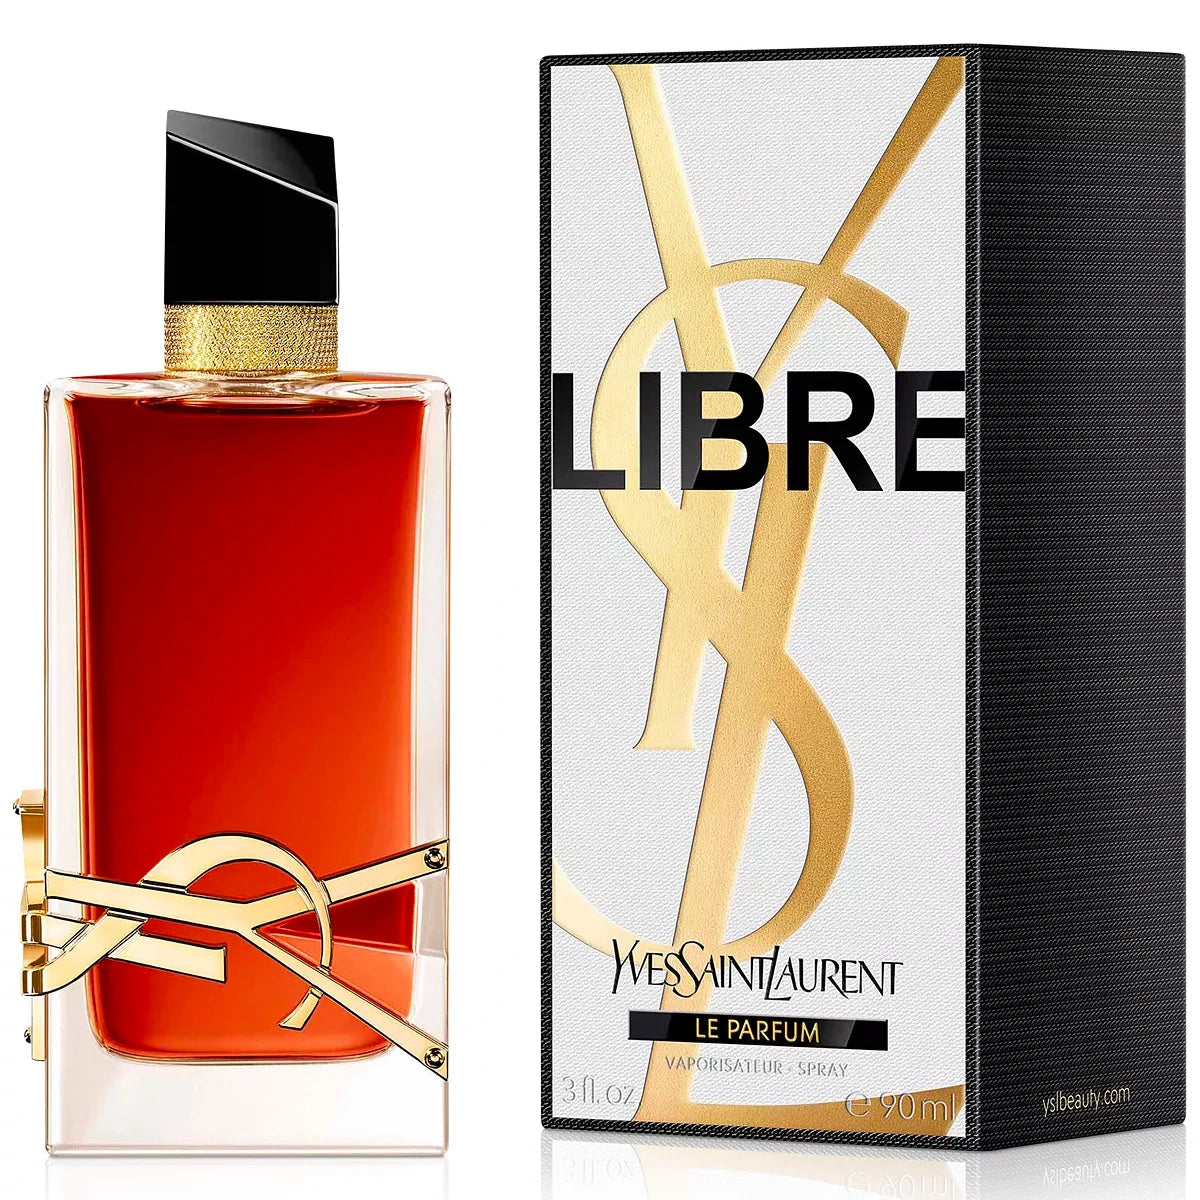 <p><strong><strong></strong></strong>The first parfum in the Libre collection, Libre Le Parfum is the most concentrated and longest-lasting perfume in the collection. An olfactive tribute to the spicy Fleurs de Feu praised by Mr. Saint Laurent himself. A burning blend turning up the temperature and twisting the iconic Libre scent with a spicy and warm take.</p>
<p>Top Notes: fresh lavender.<br>Middle Notes: orange blossom.<br>Base Notes: rare warm saffron accord.</p>